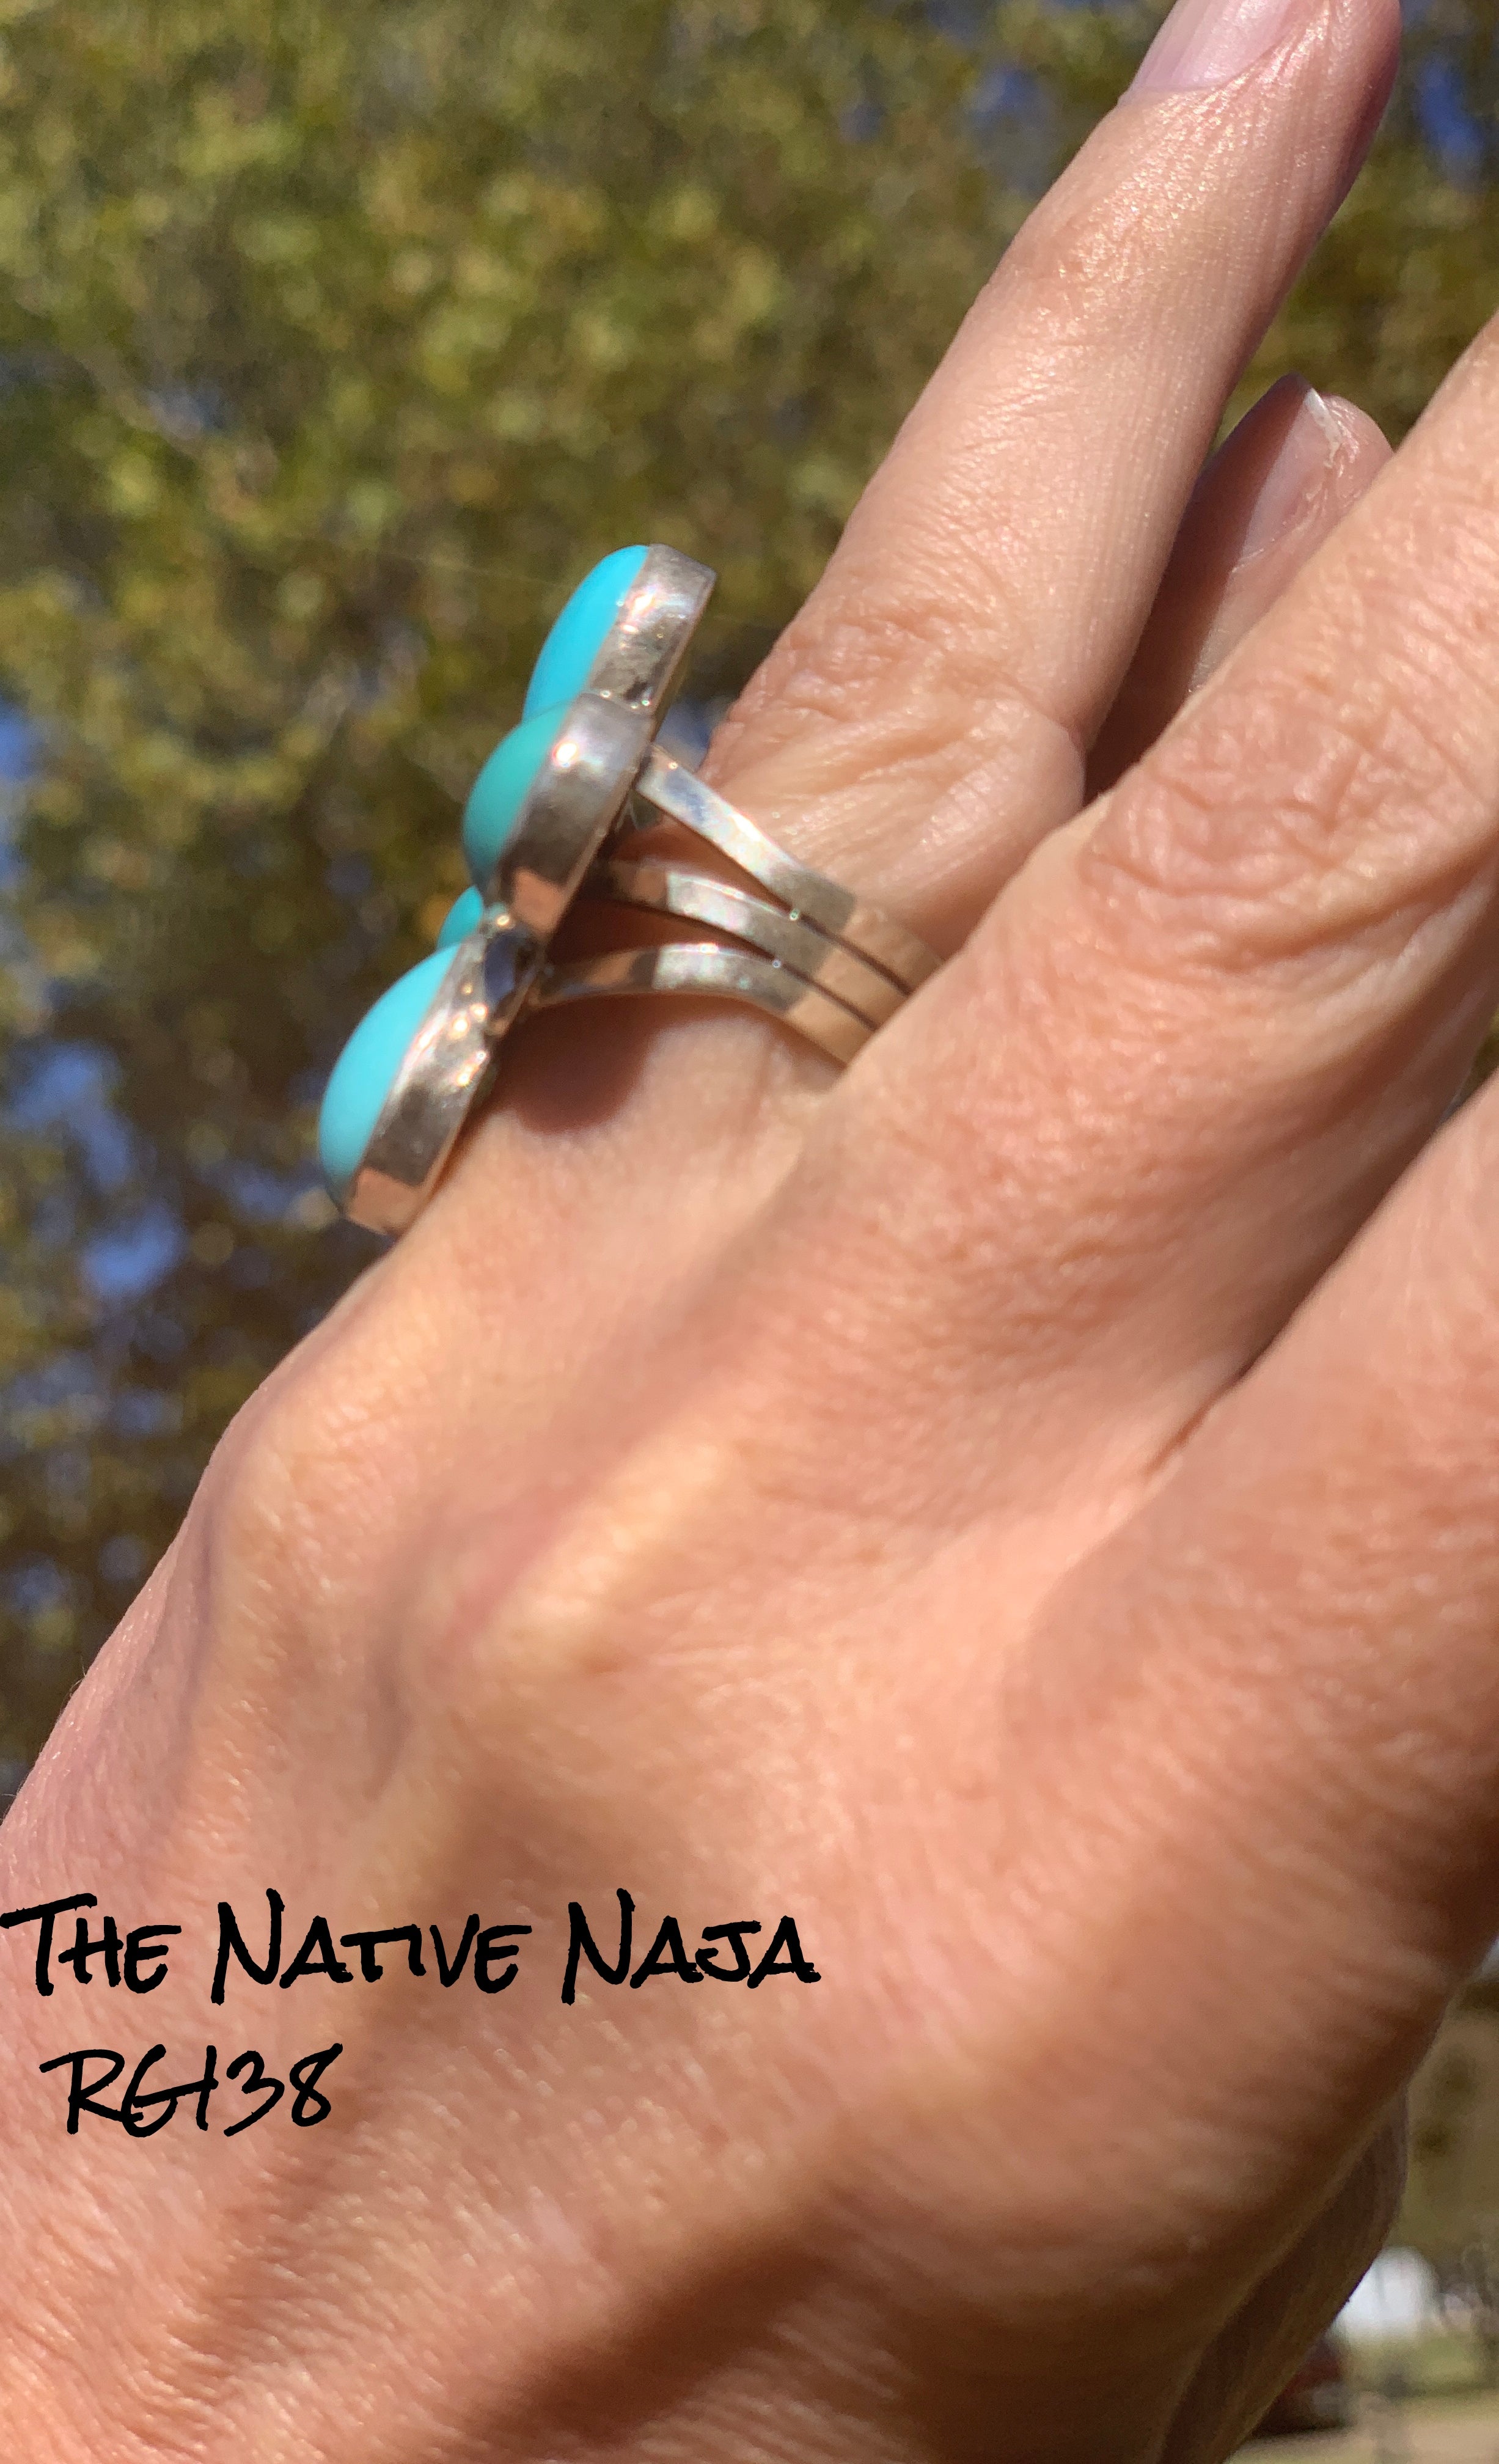 Large Navajo Etta Endito Genuine Sterling Silver & Campitos Turquoise Ring Size 7 1/2 RG138